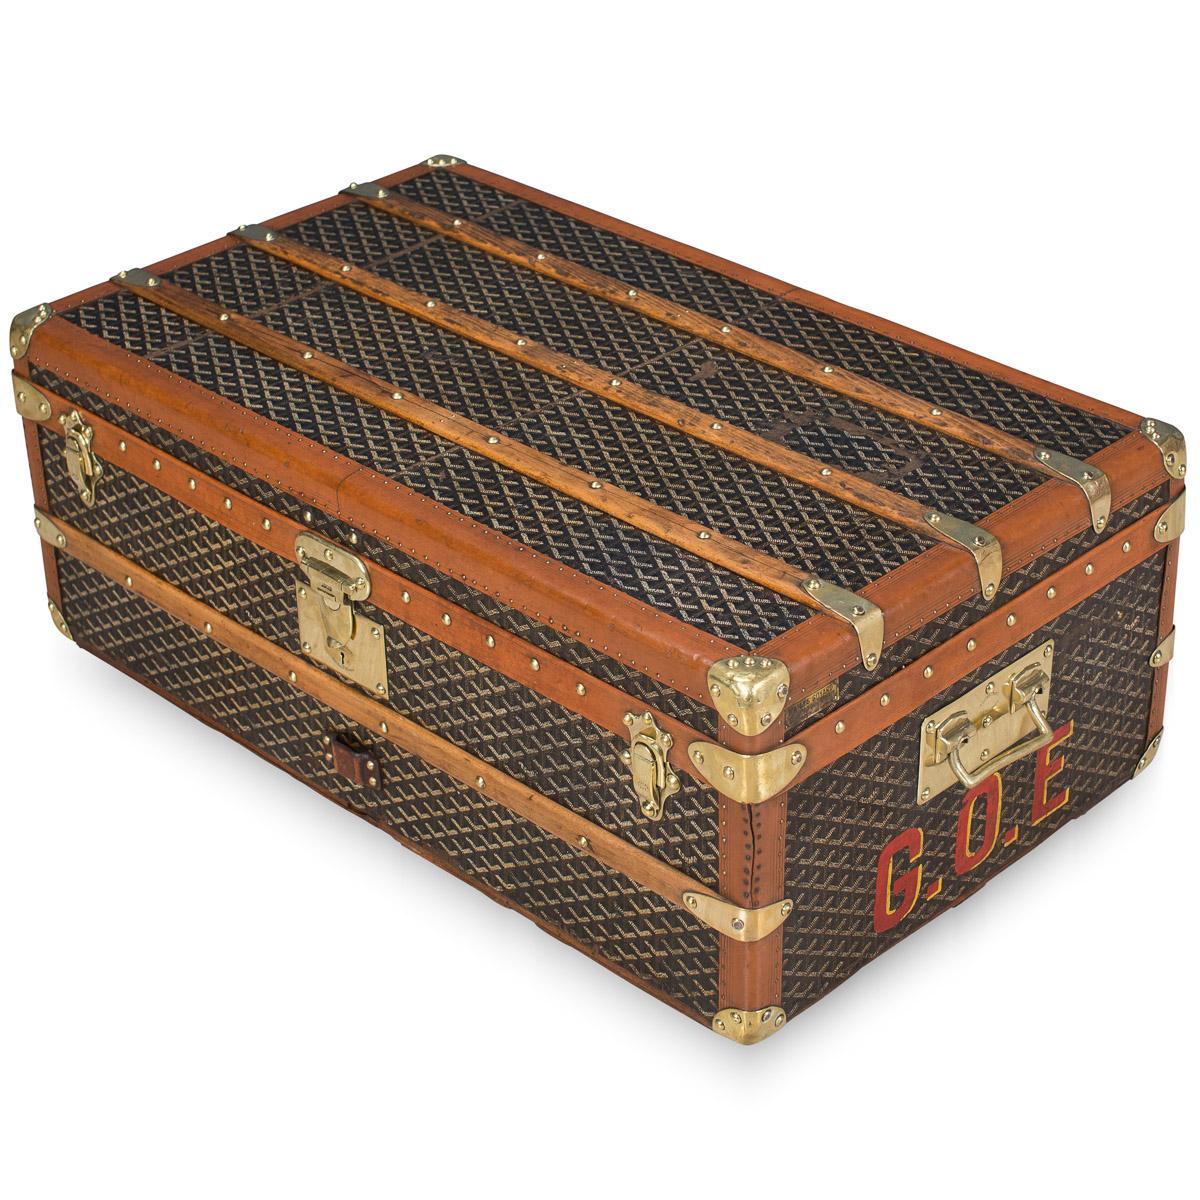 A wonderful Goyard cabin trunk dating to the early part of the 20th century, circa 1900-1910. Over recent years the brand has been relaunched and has taken the world of fashion by storm. The original E. Goyard firm was a trunk maker which rivalled